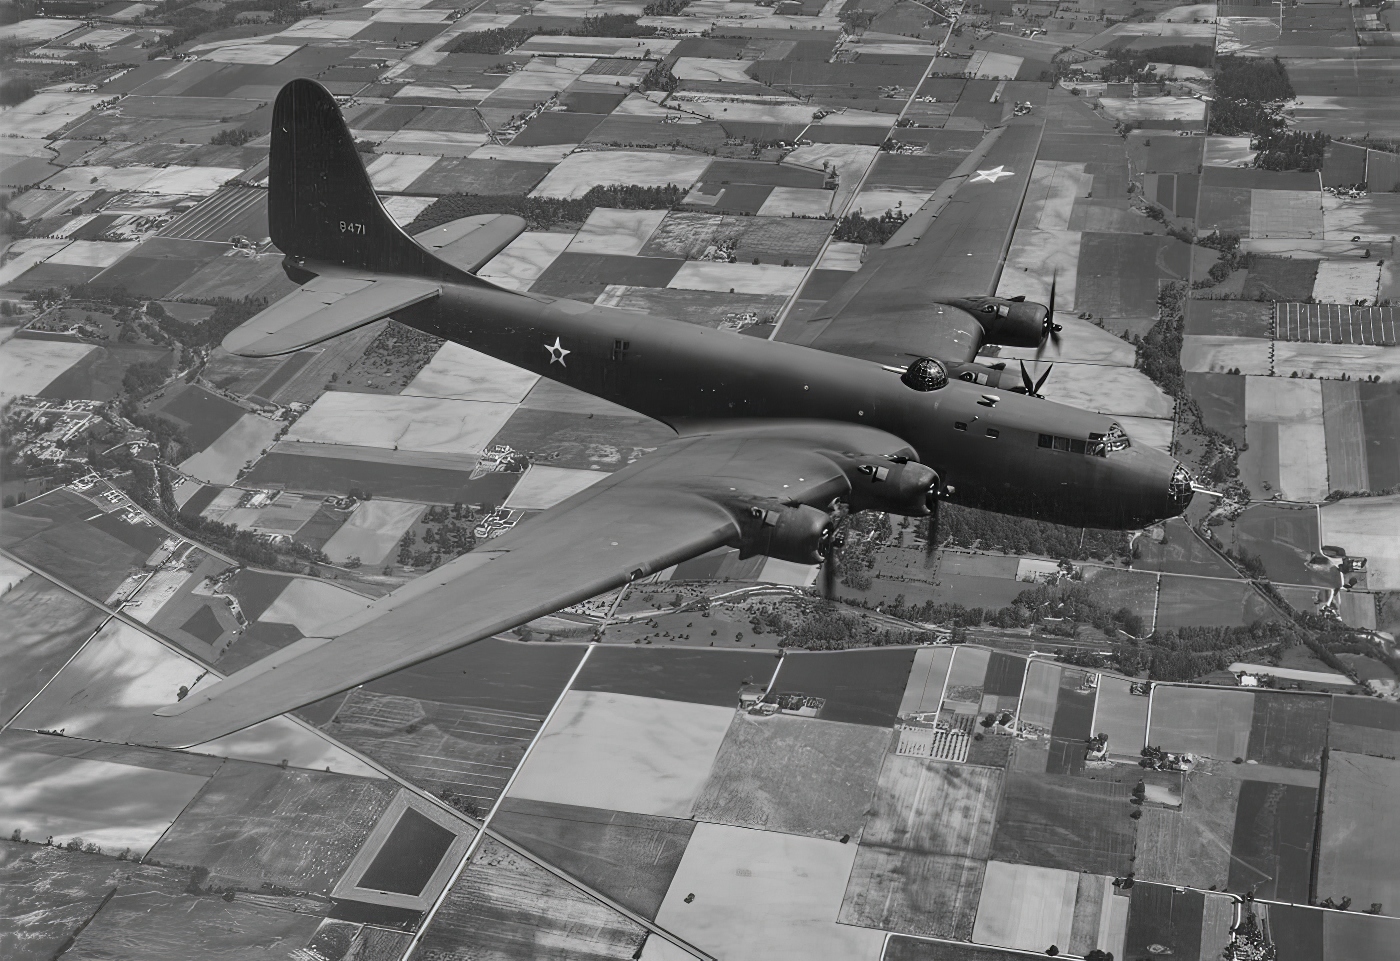 The Douglas XB-19 was the largest bomber aircraft built for the United States Army Air Corps until 1946